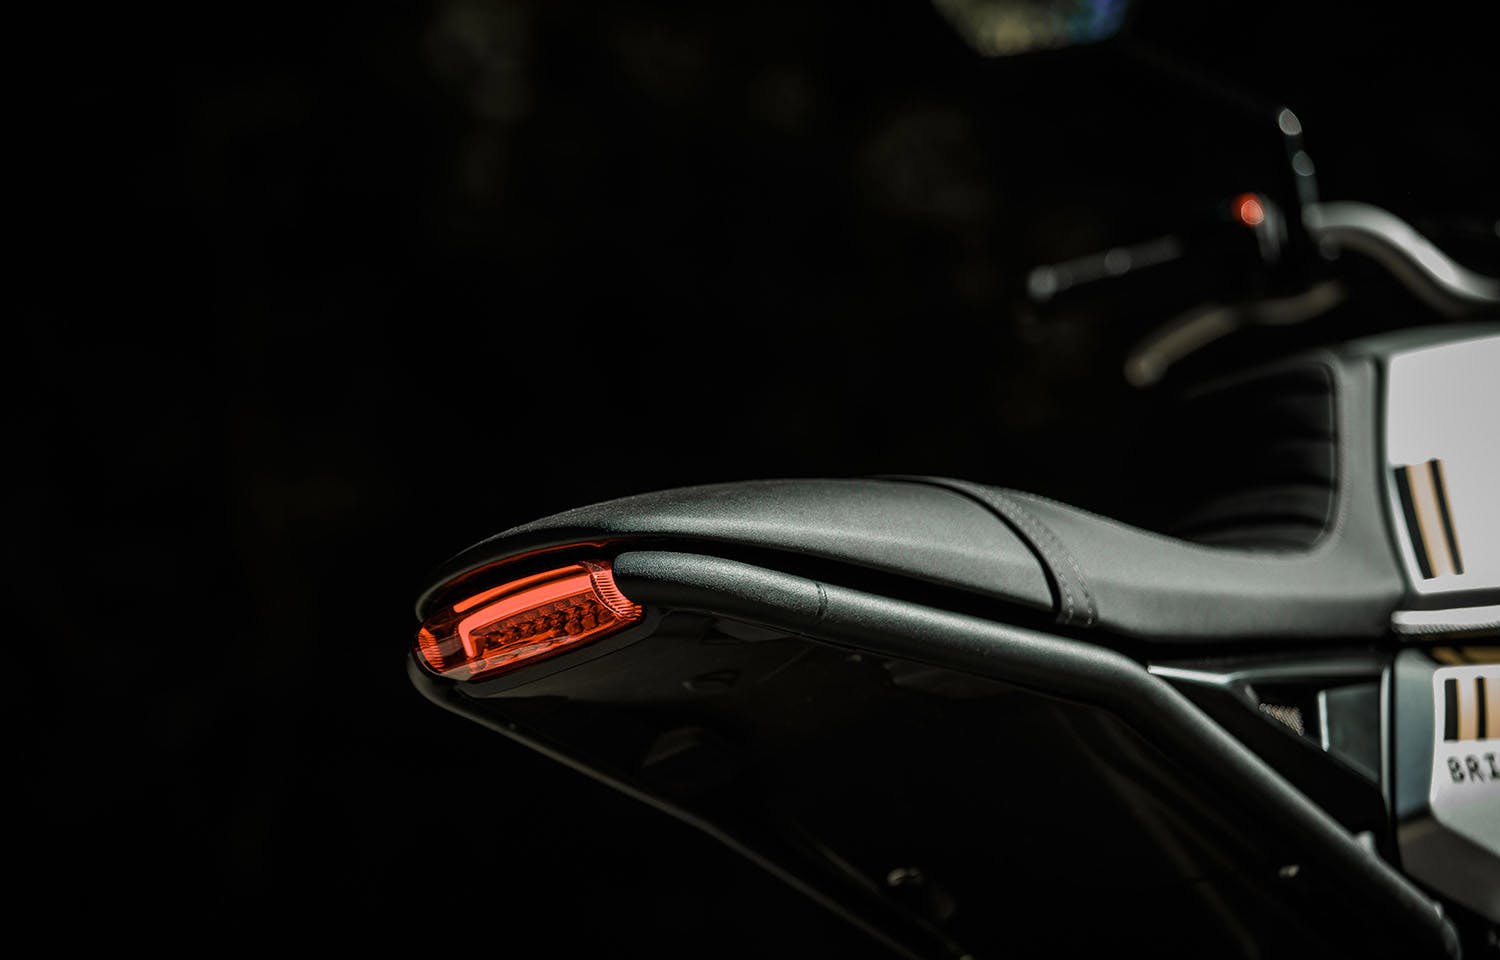 Close-up of the rear light of a Brixton Crossfire 500